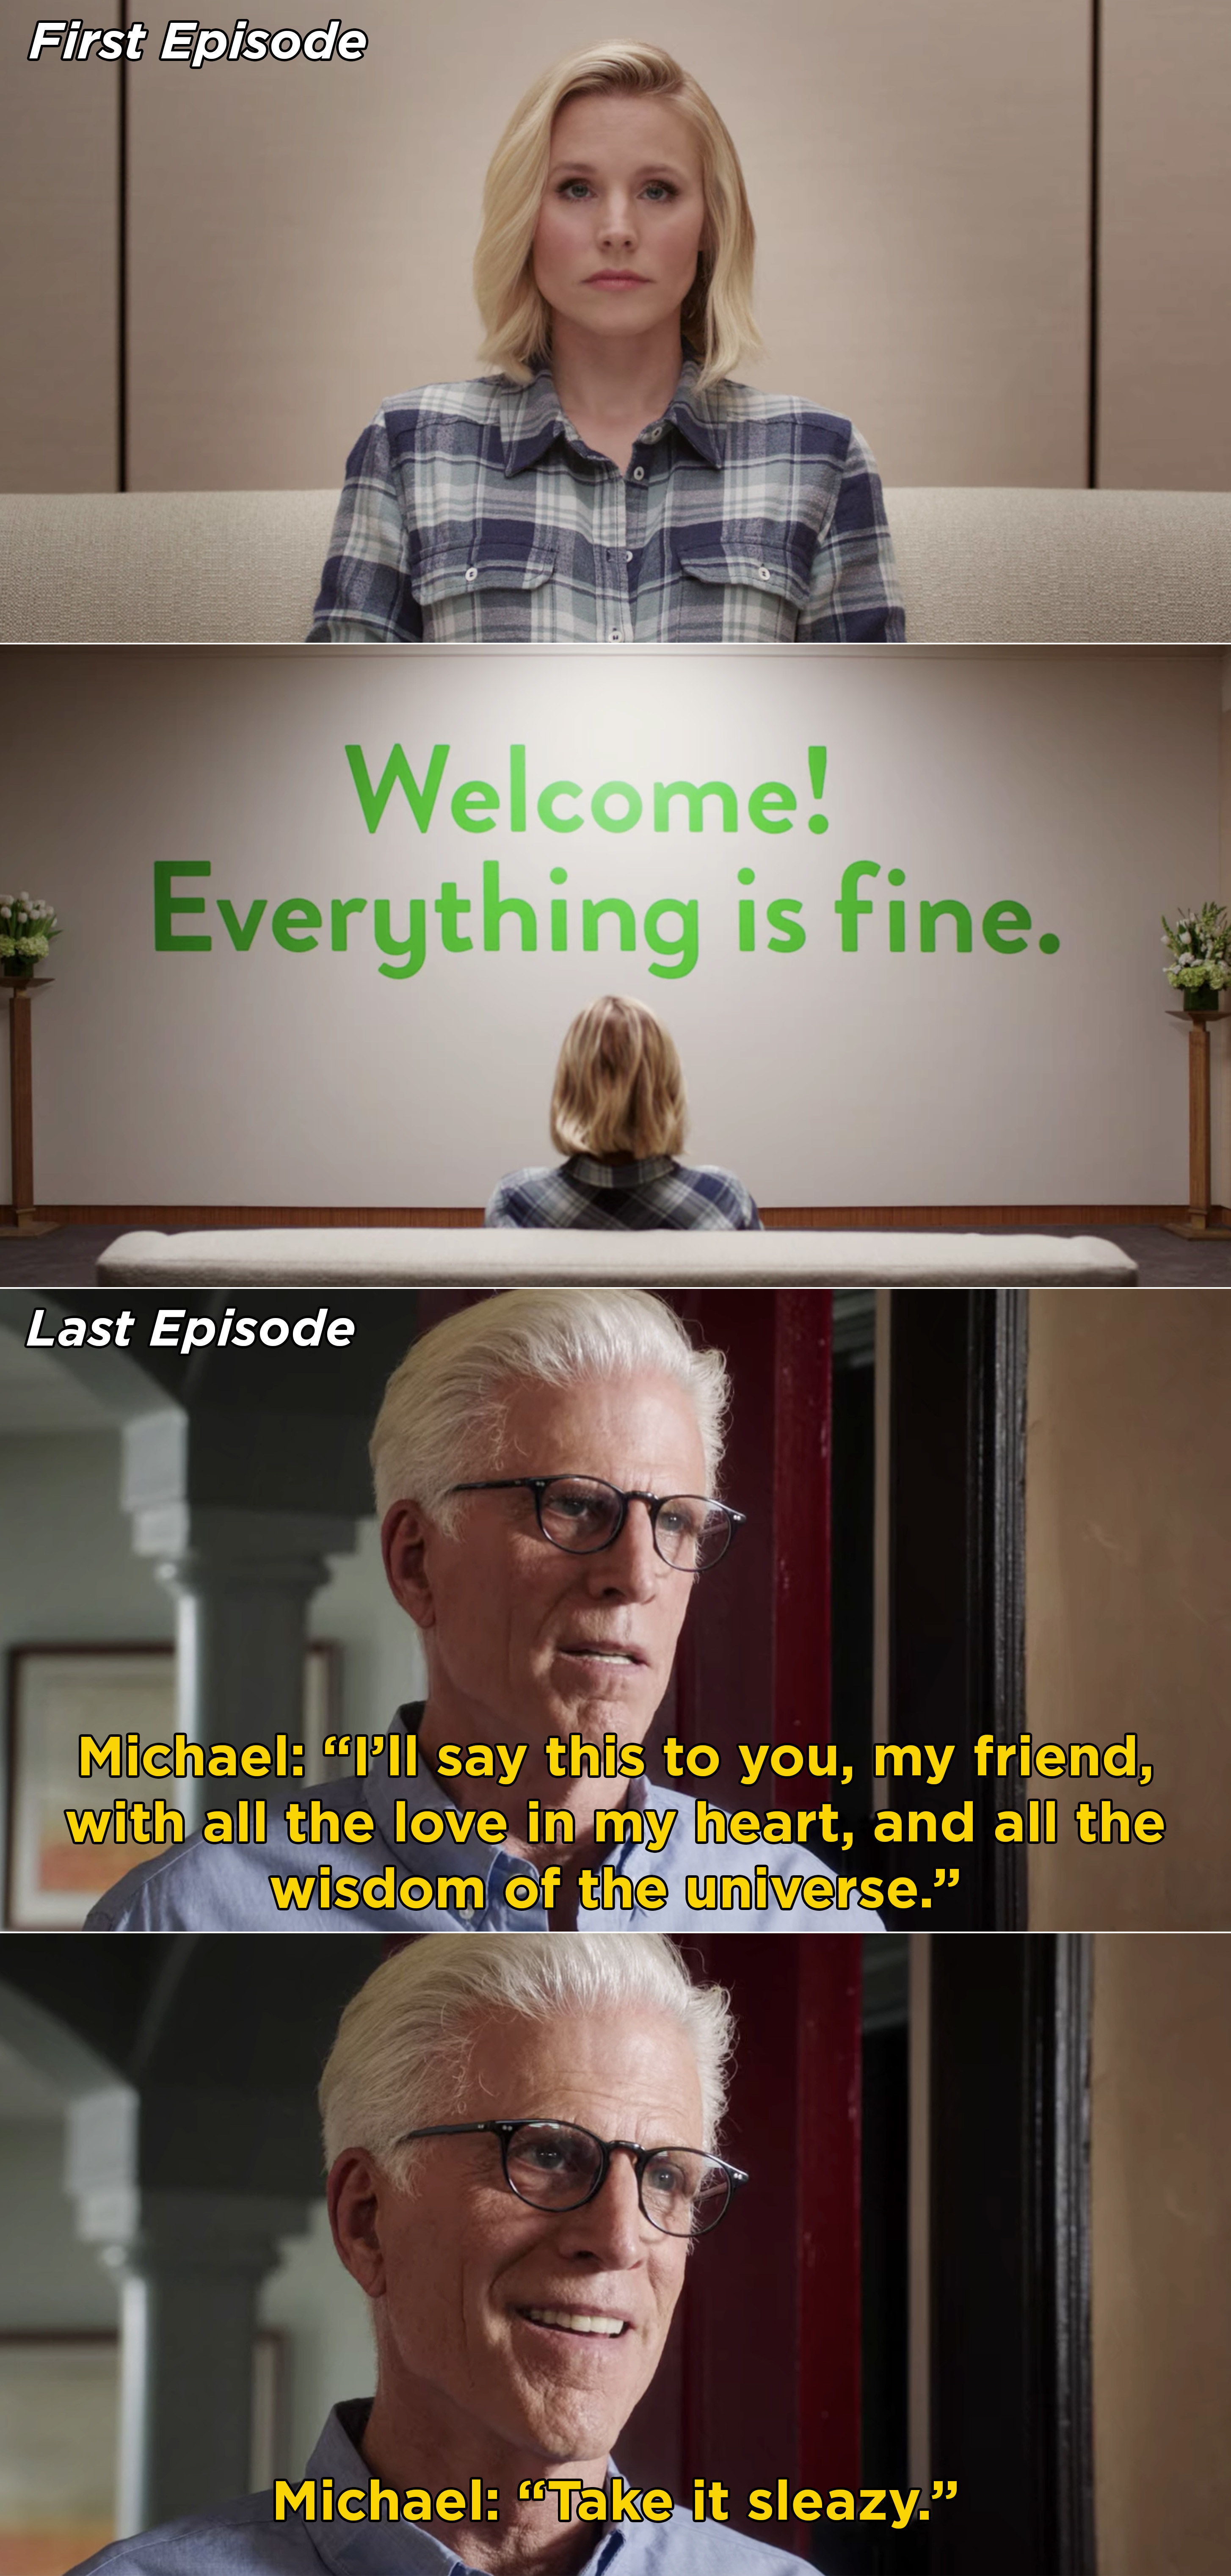 Eleanor looking at the &quot;Welcome! Everything is fine&quot; sign and Michael saying &quot;Take it sleazy&quot; in the series finale